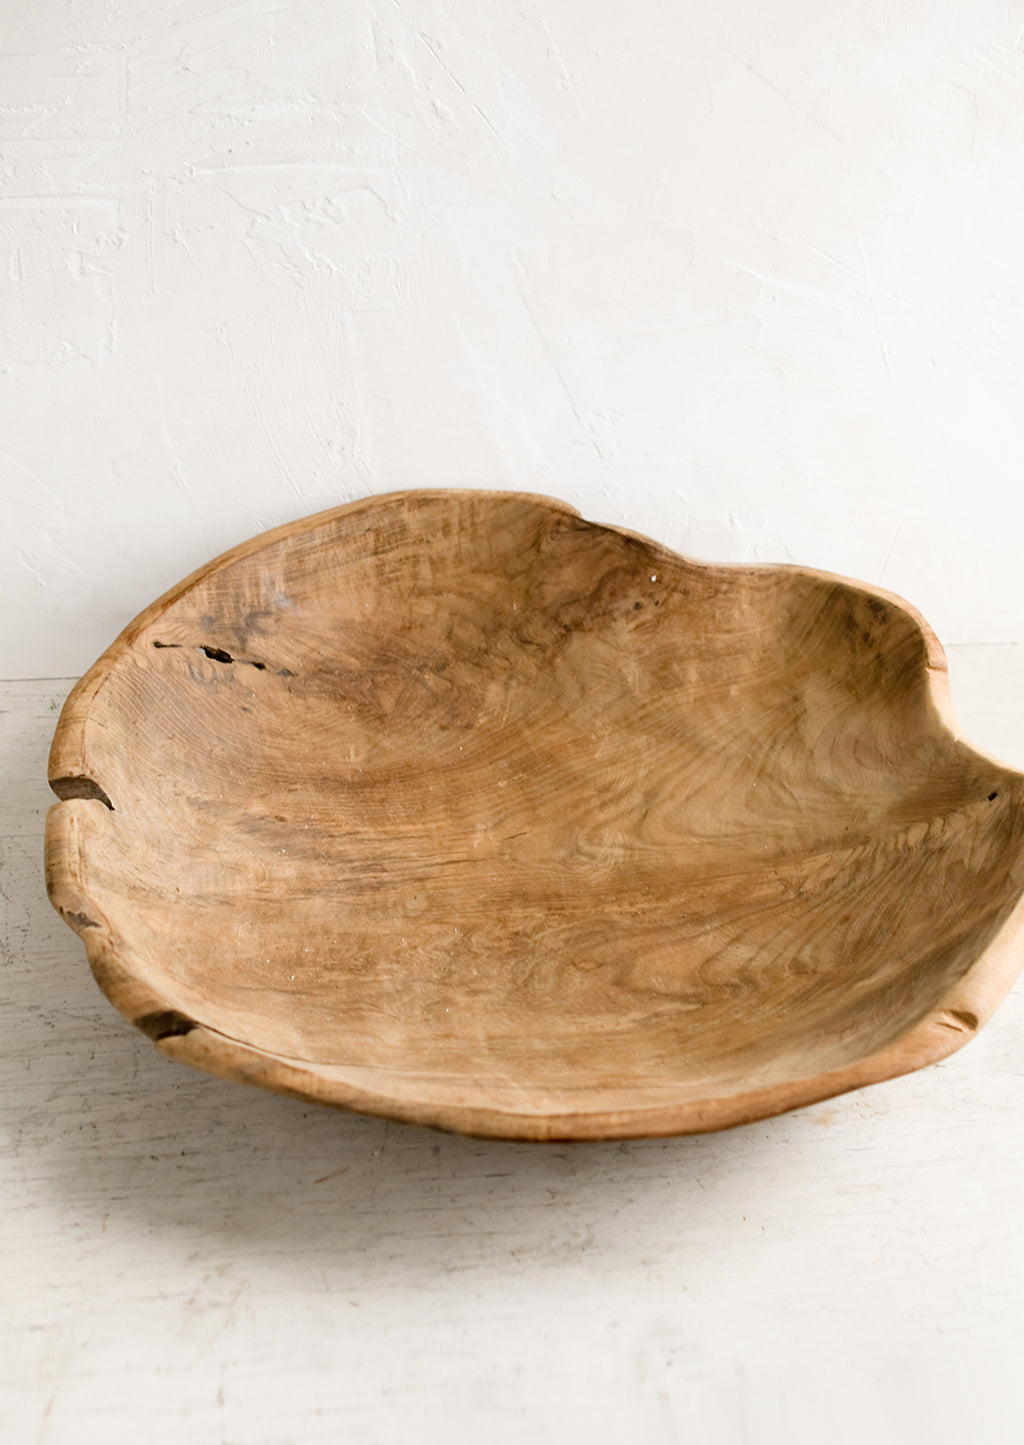 2: A large teak wood bowl with natural cracks and fissures.